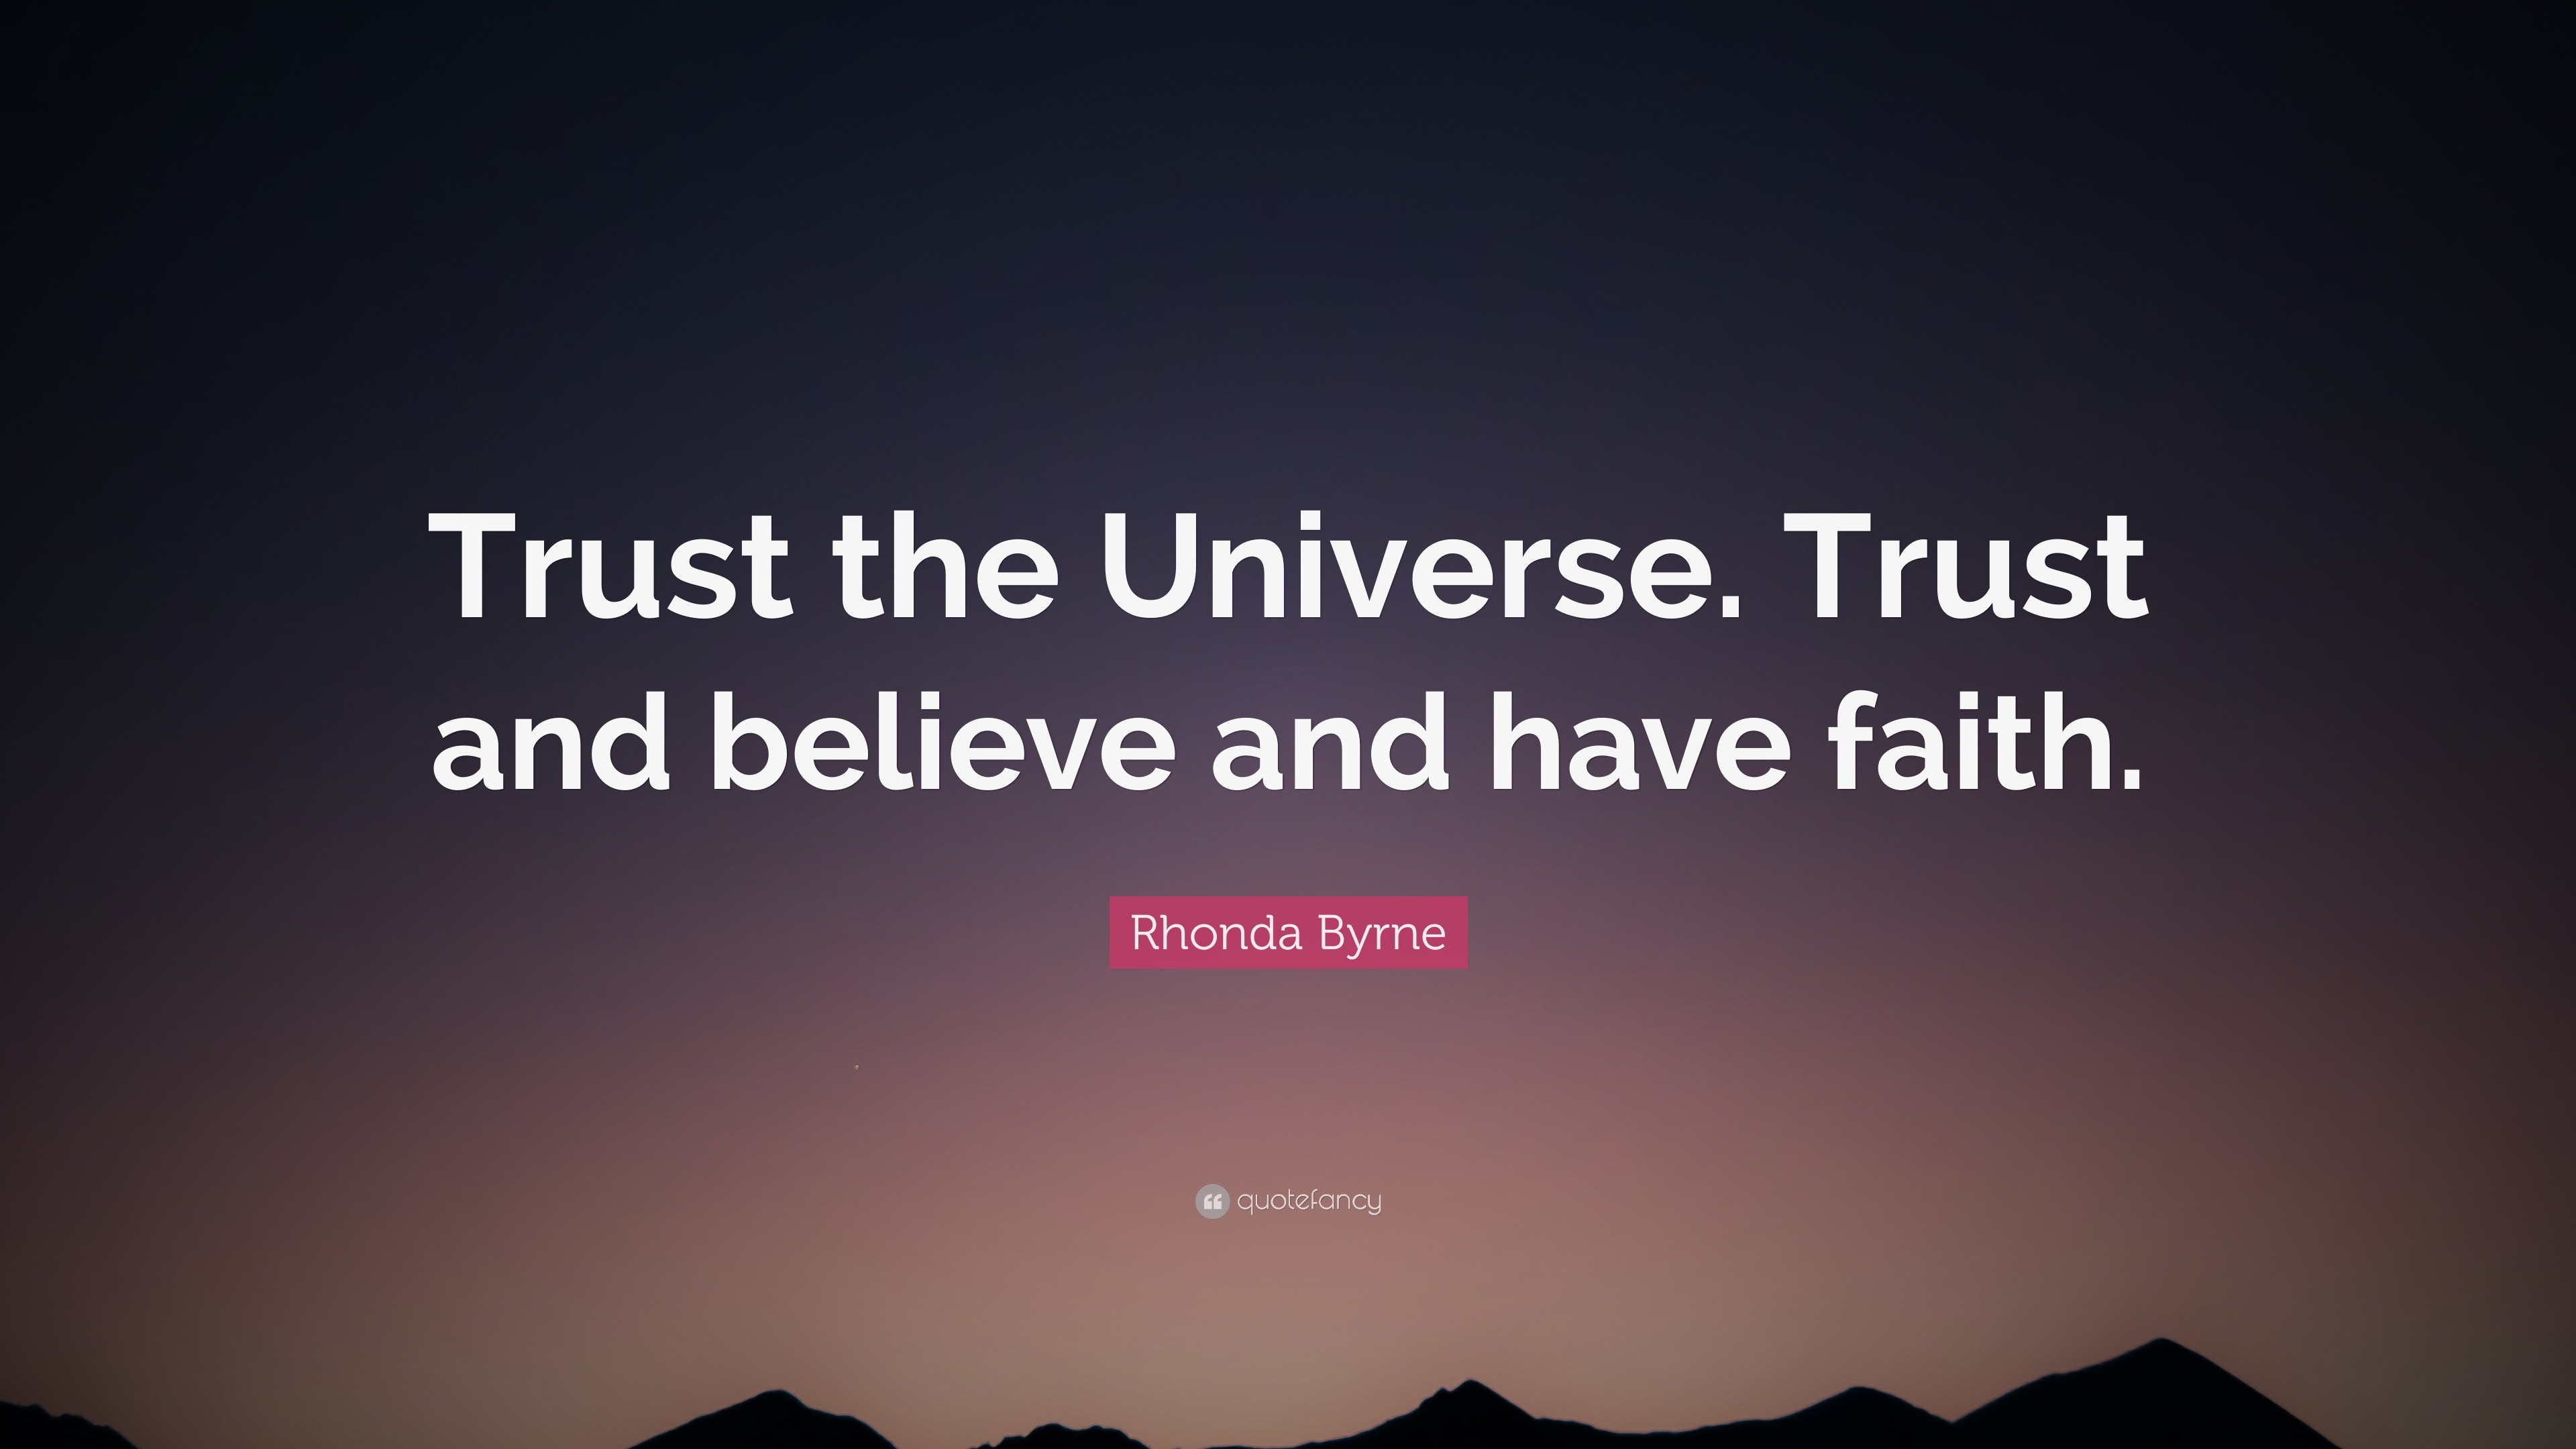 Rhonda Byrne Quote: “Trust the Universe. Trust and believe and have